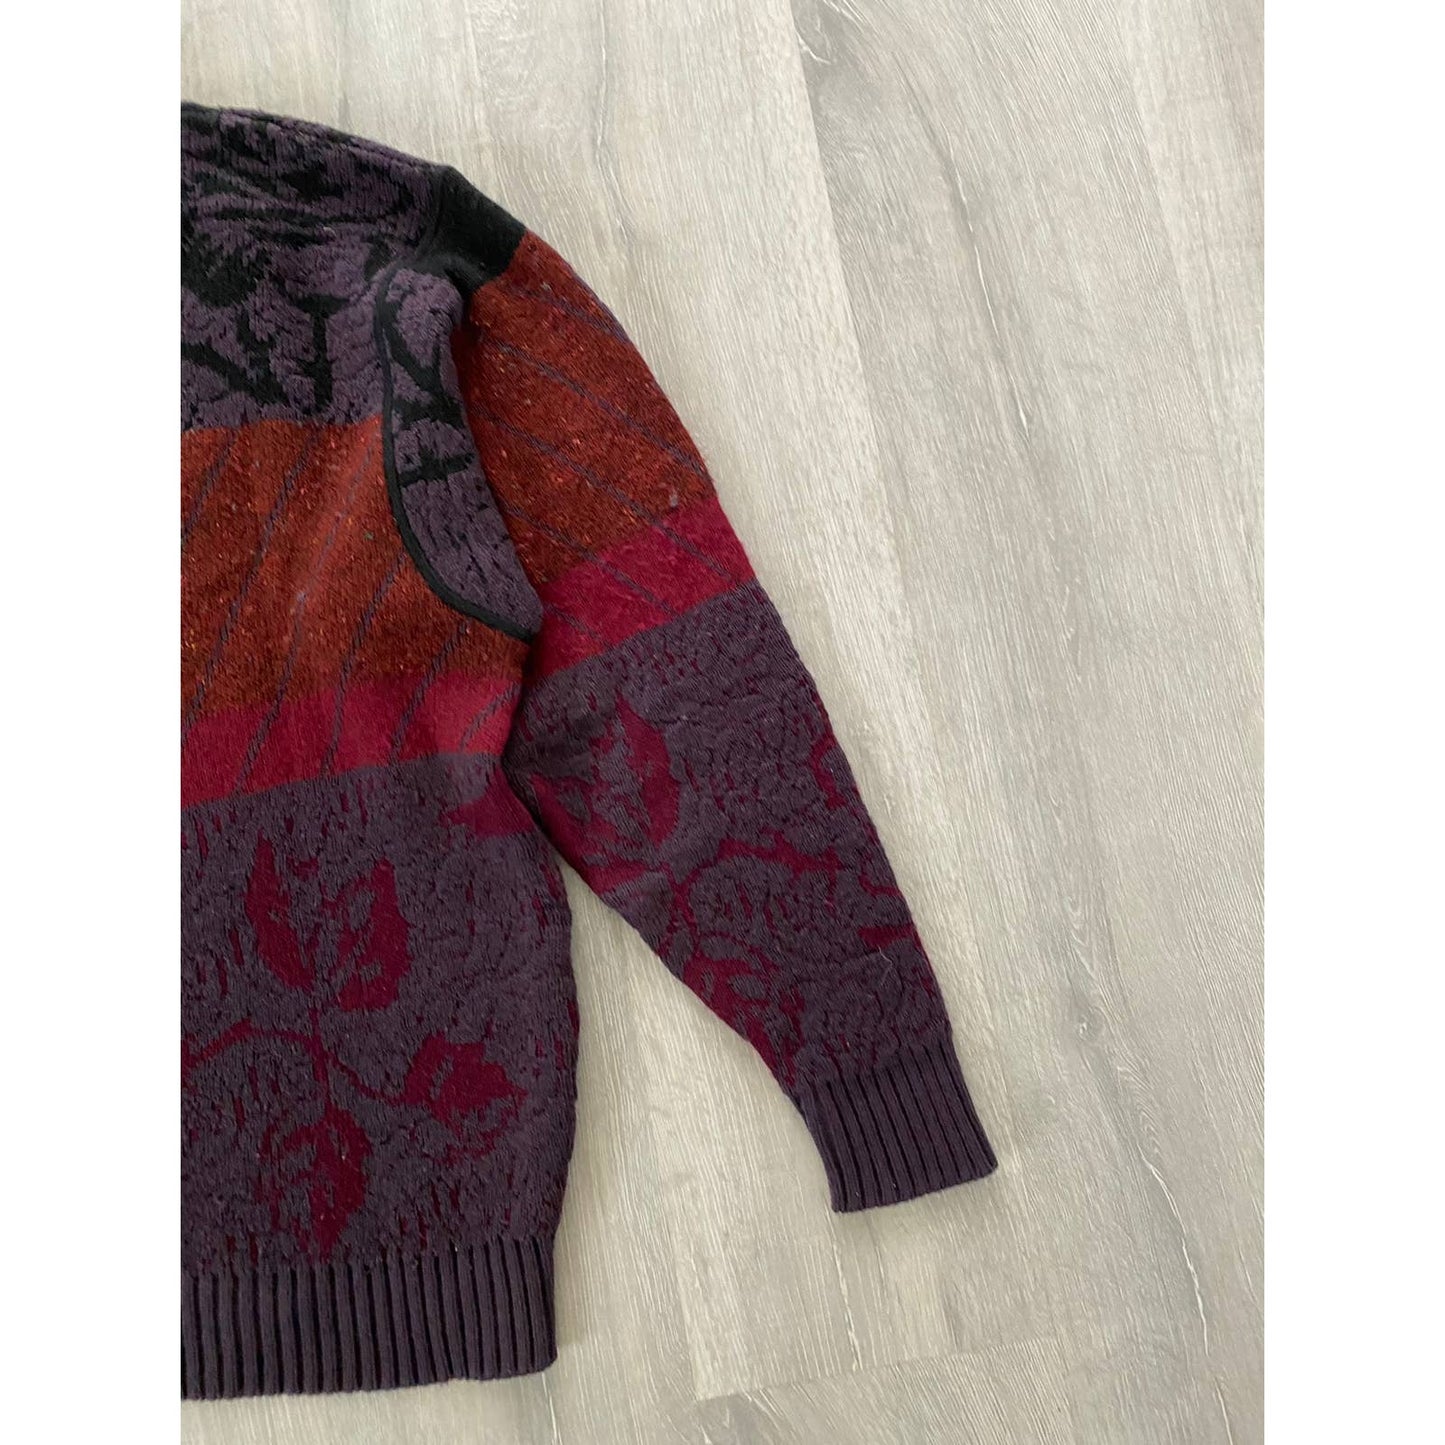 Carlo Colucci vintage sweater knitwear floral Purple red